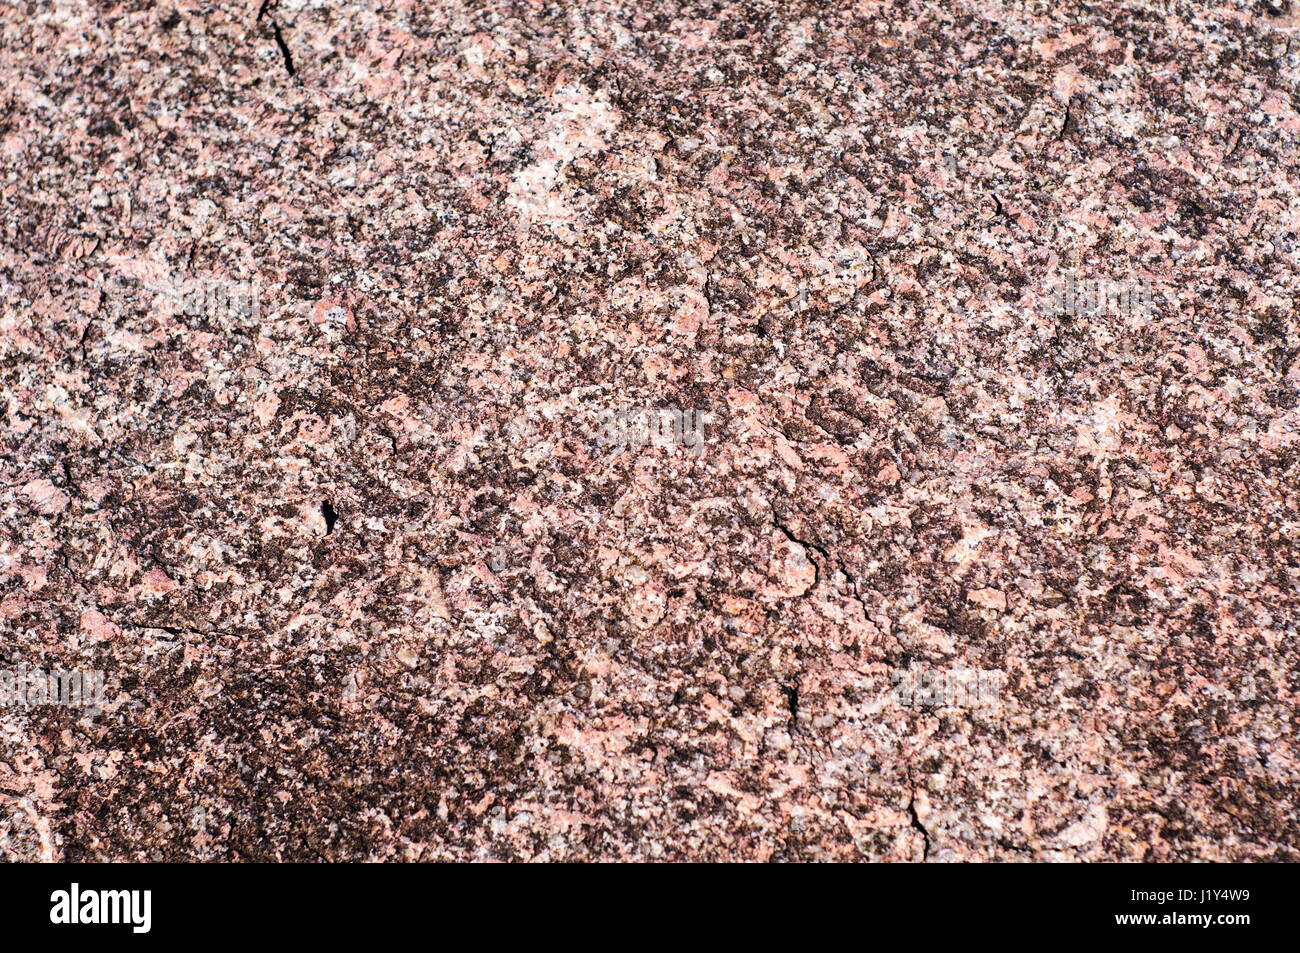 Red granite background texture. Taken near Enchanted Rock on the Edwards Plateau in the Texas Hill Country Stock Photo